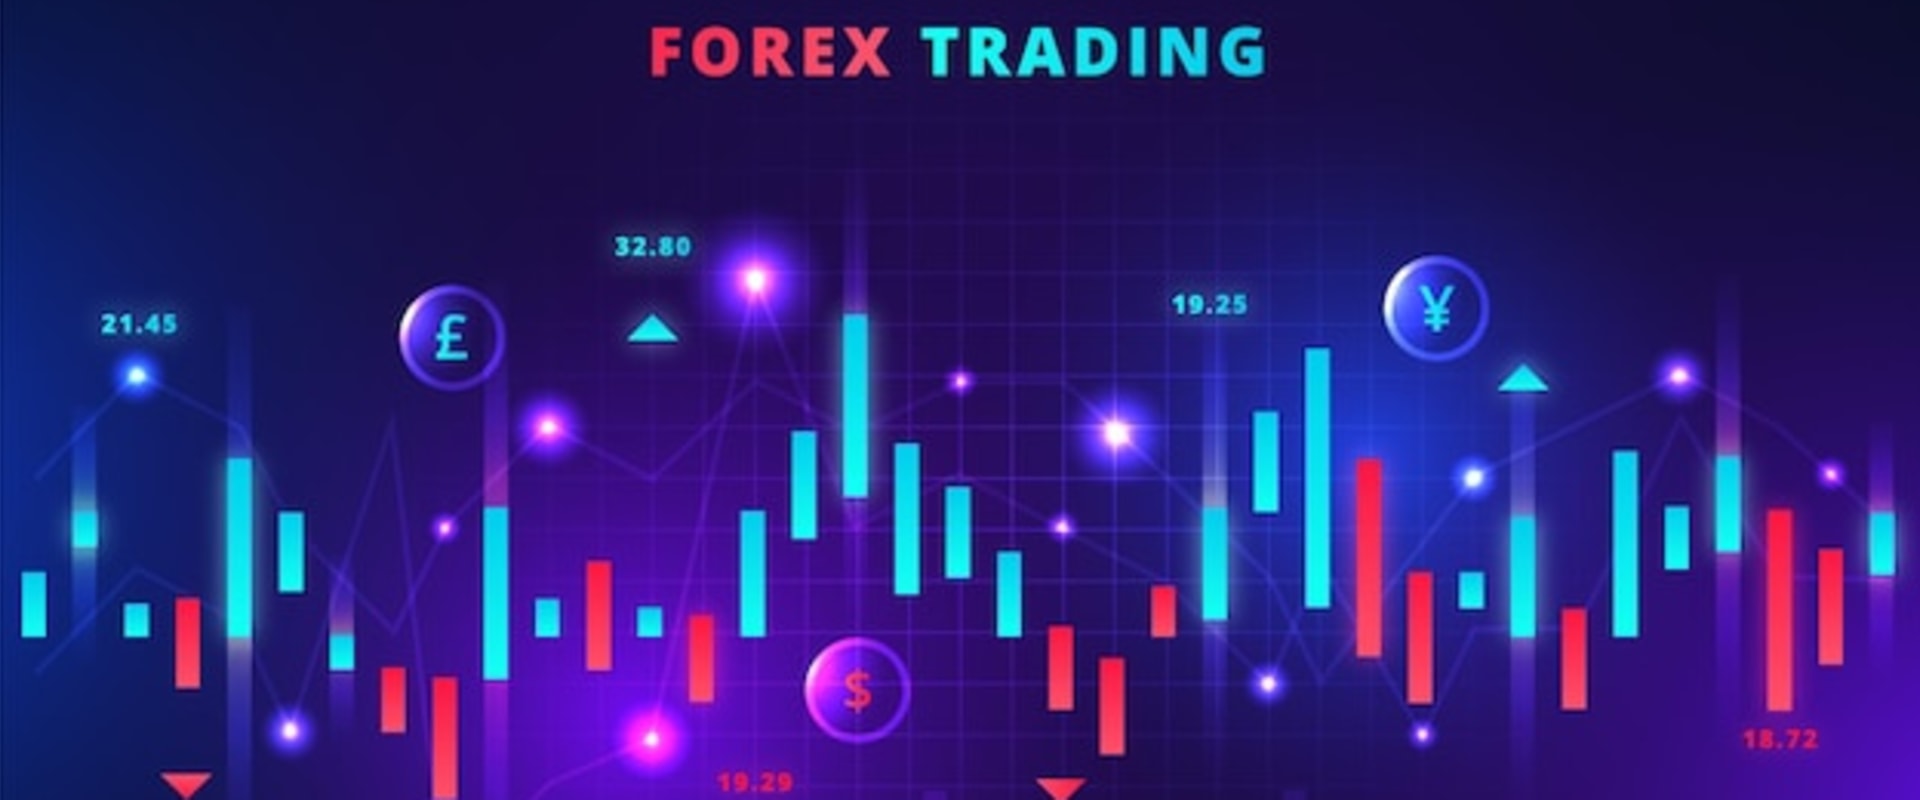 Understanding the Risk to Reward Ratio in Forex Trading